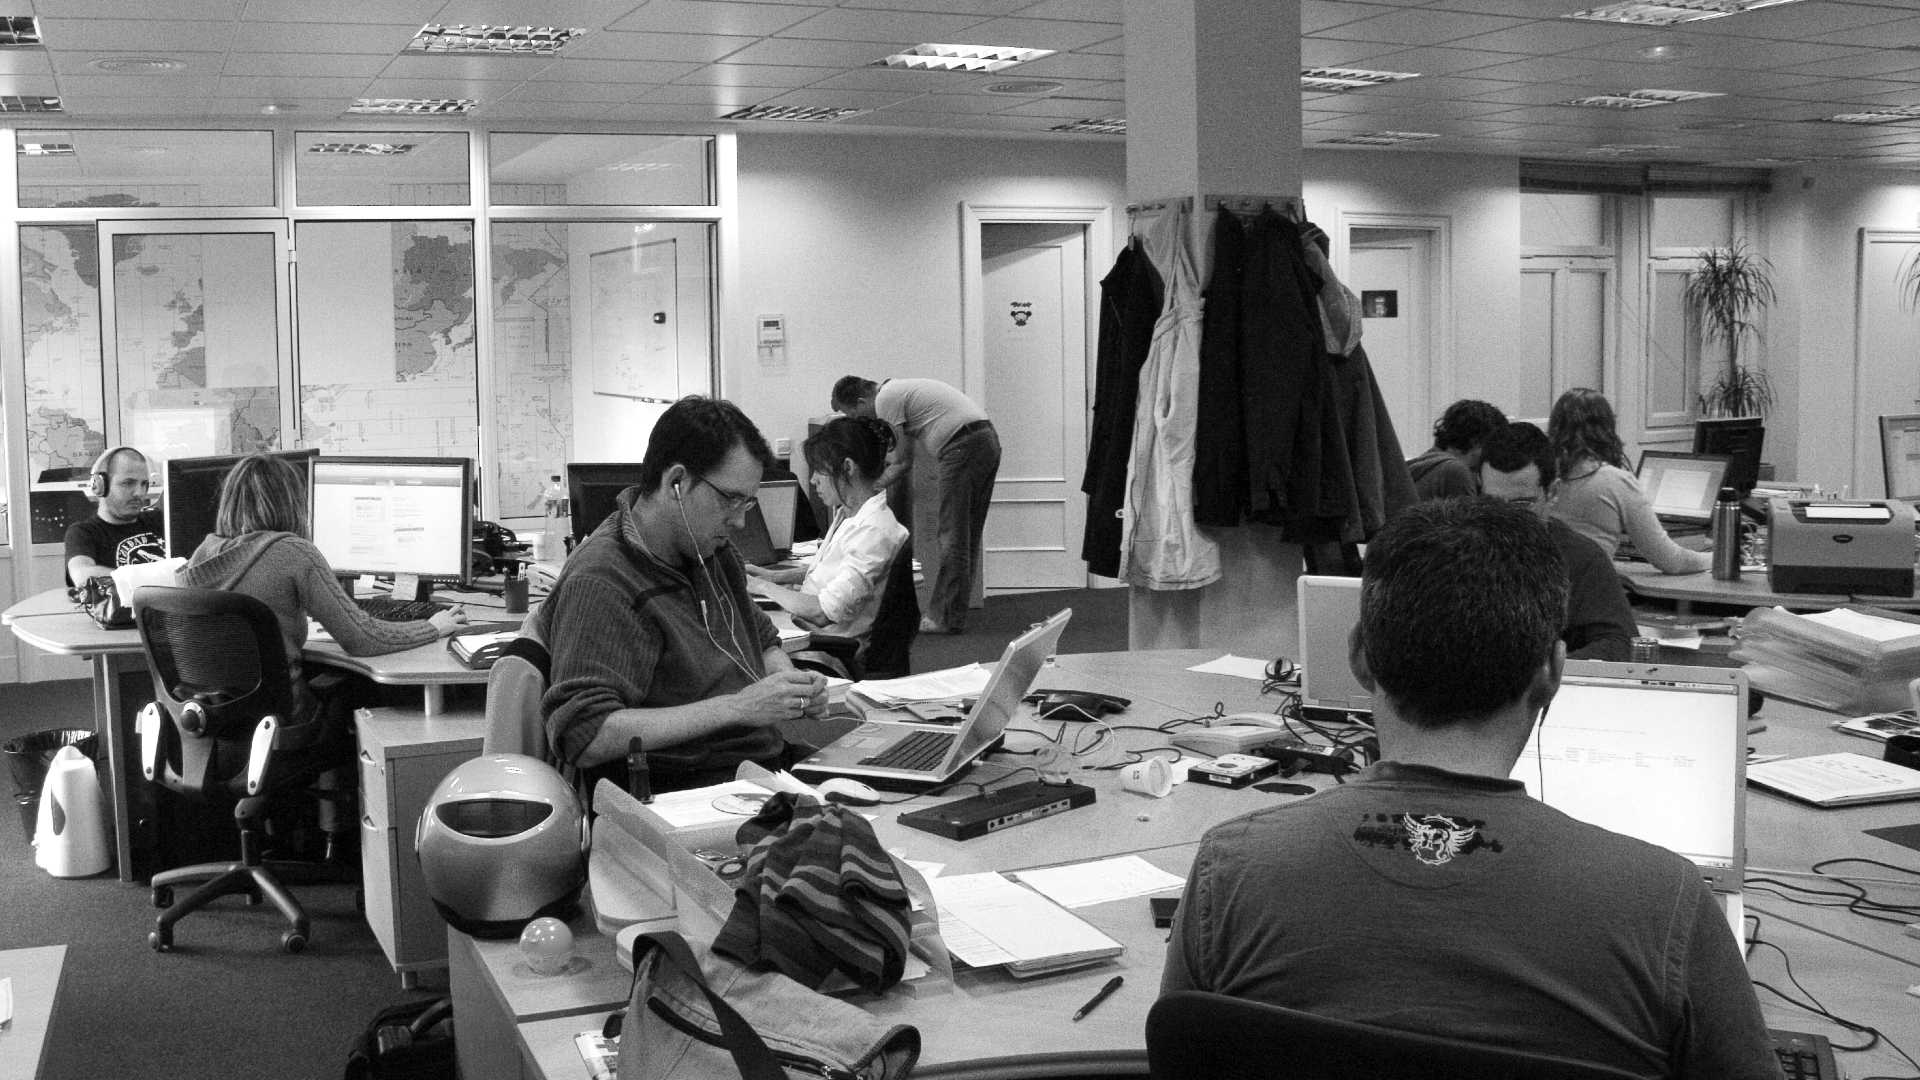 “Office" by Jesús Corrius, used under CC BY 2.0 / Cropped, desaturated and resampled from original